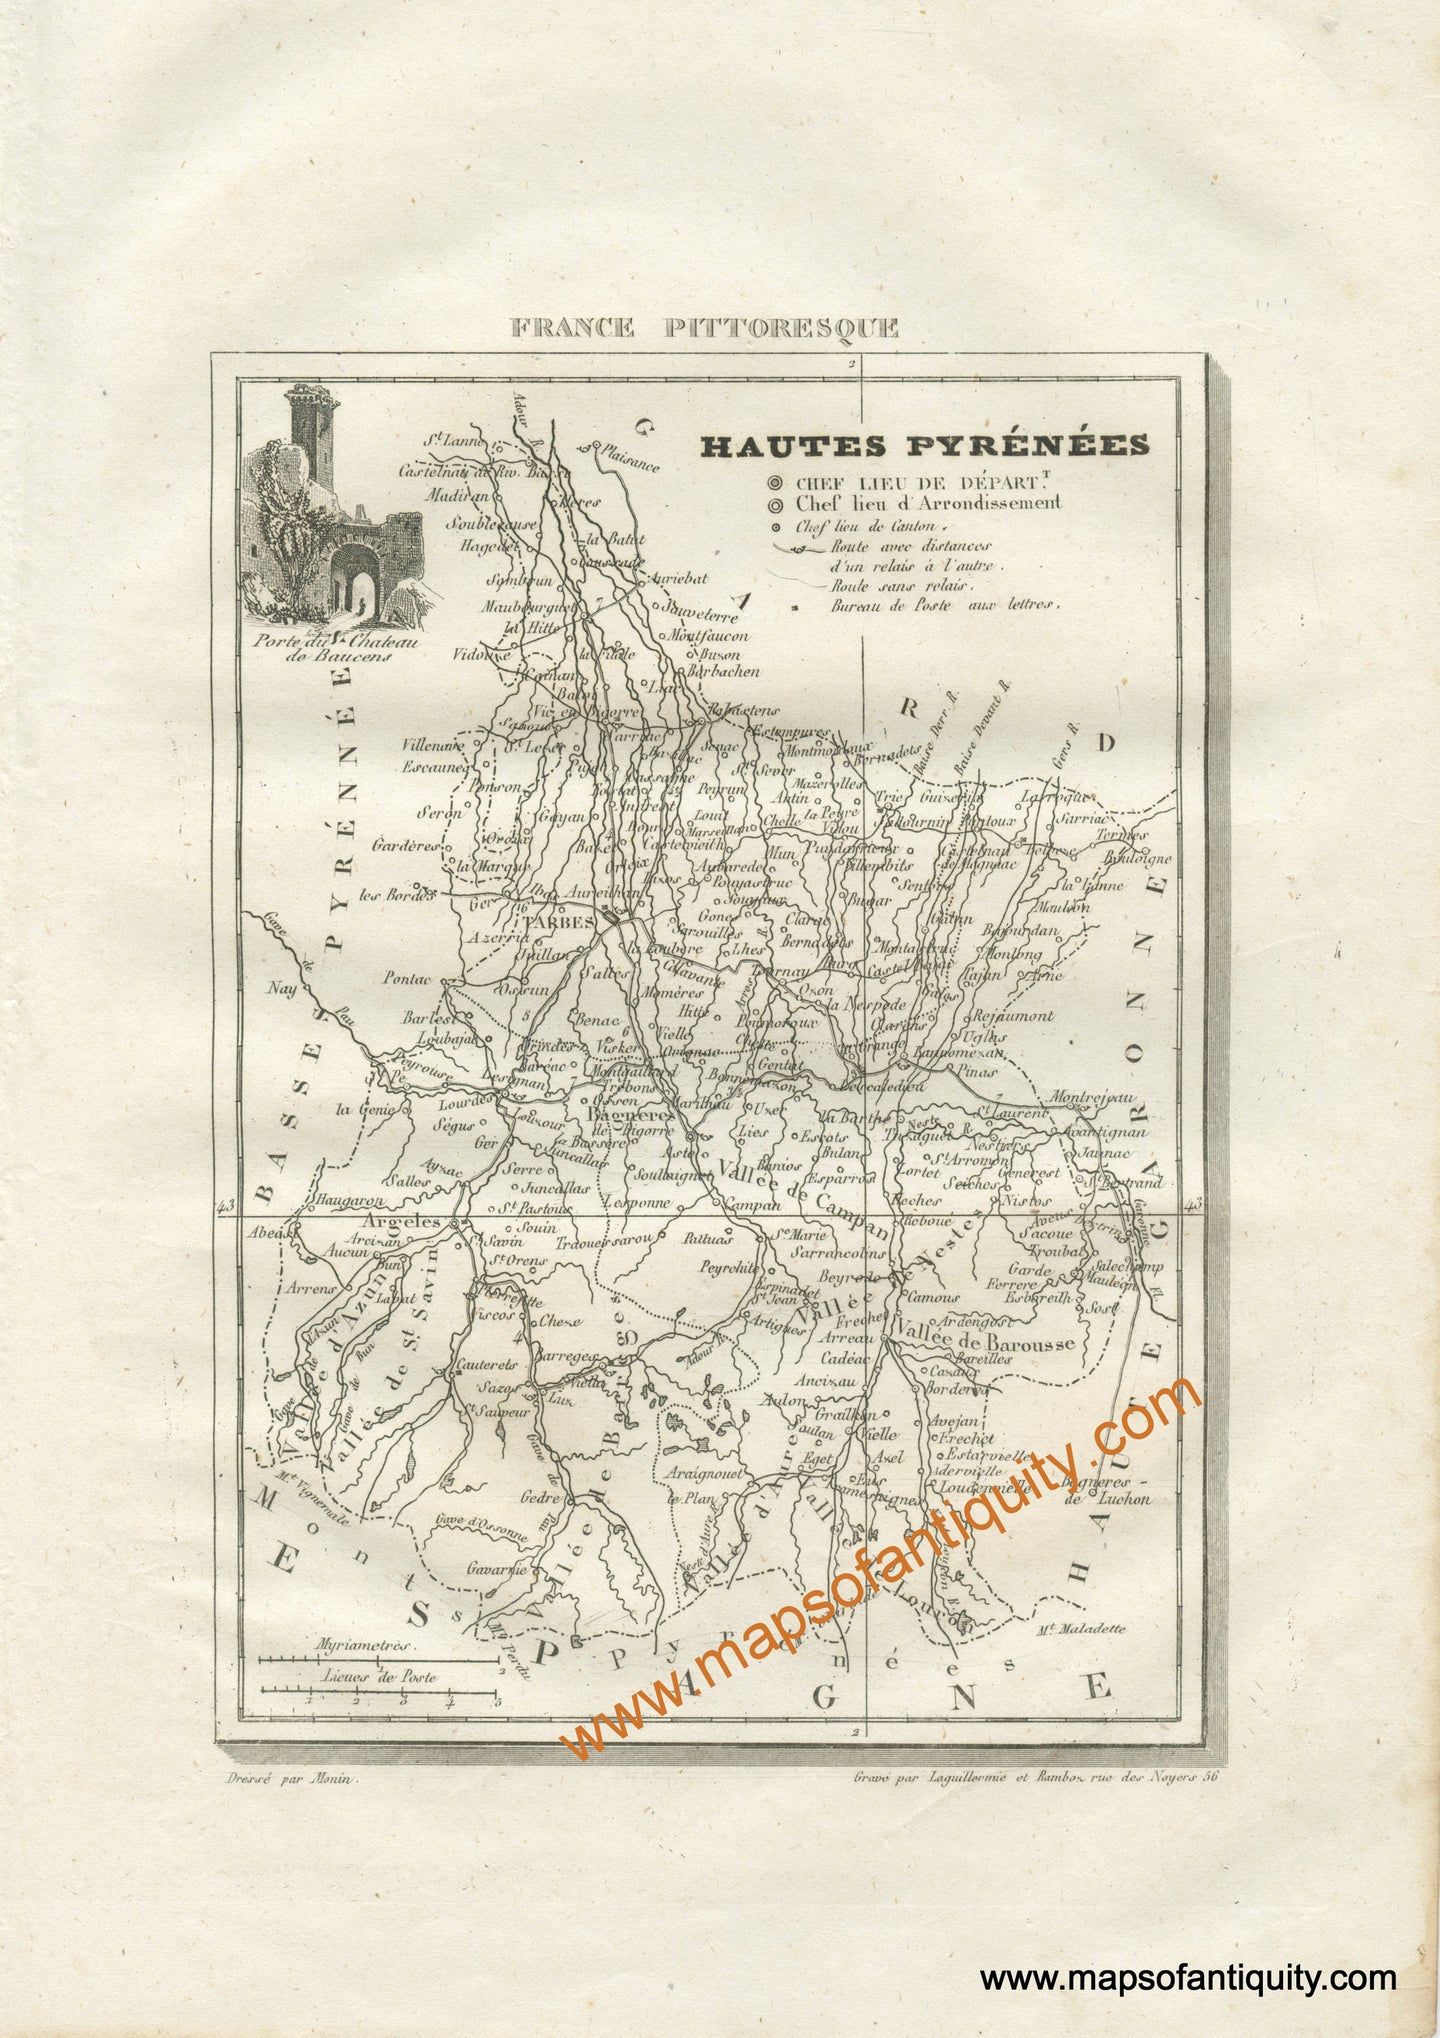 Antique-Black-and-White-Map-France-Hautes-Pyrenees-including-the-cities-of-Tarbes-Argetes-and-Bagneres-Europe-France-1835-Monin-Maps-Of-Antiquity